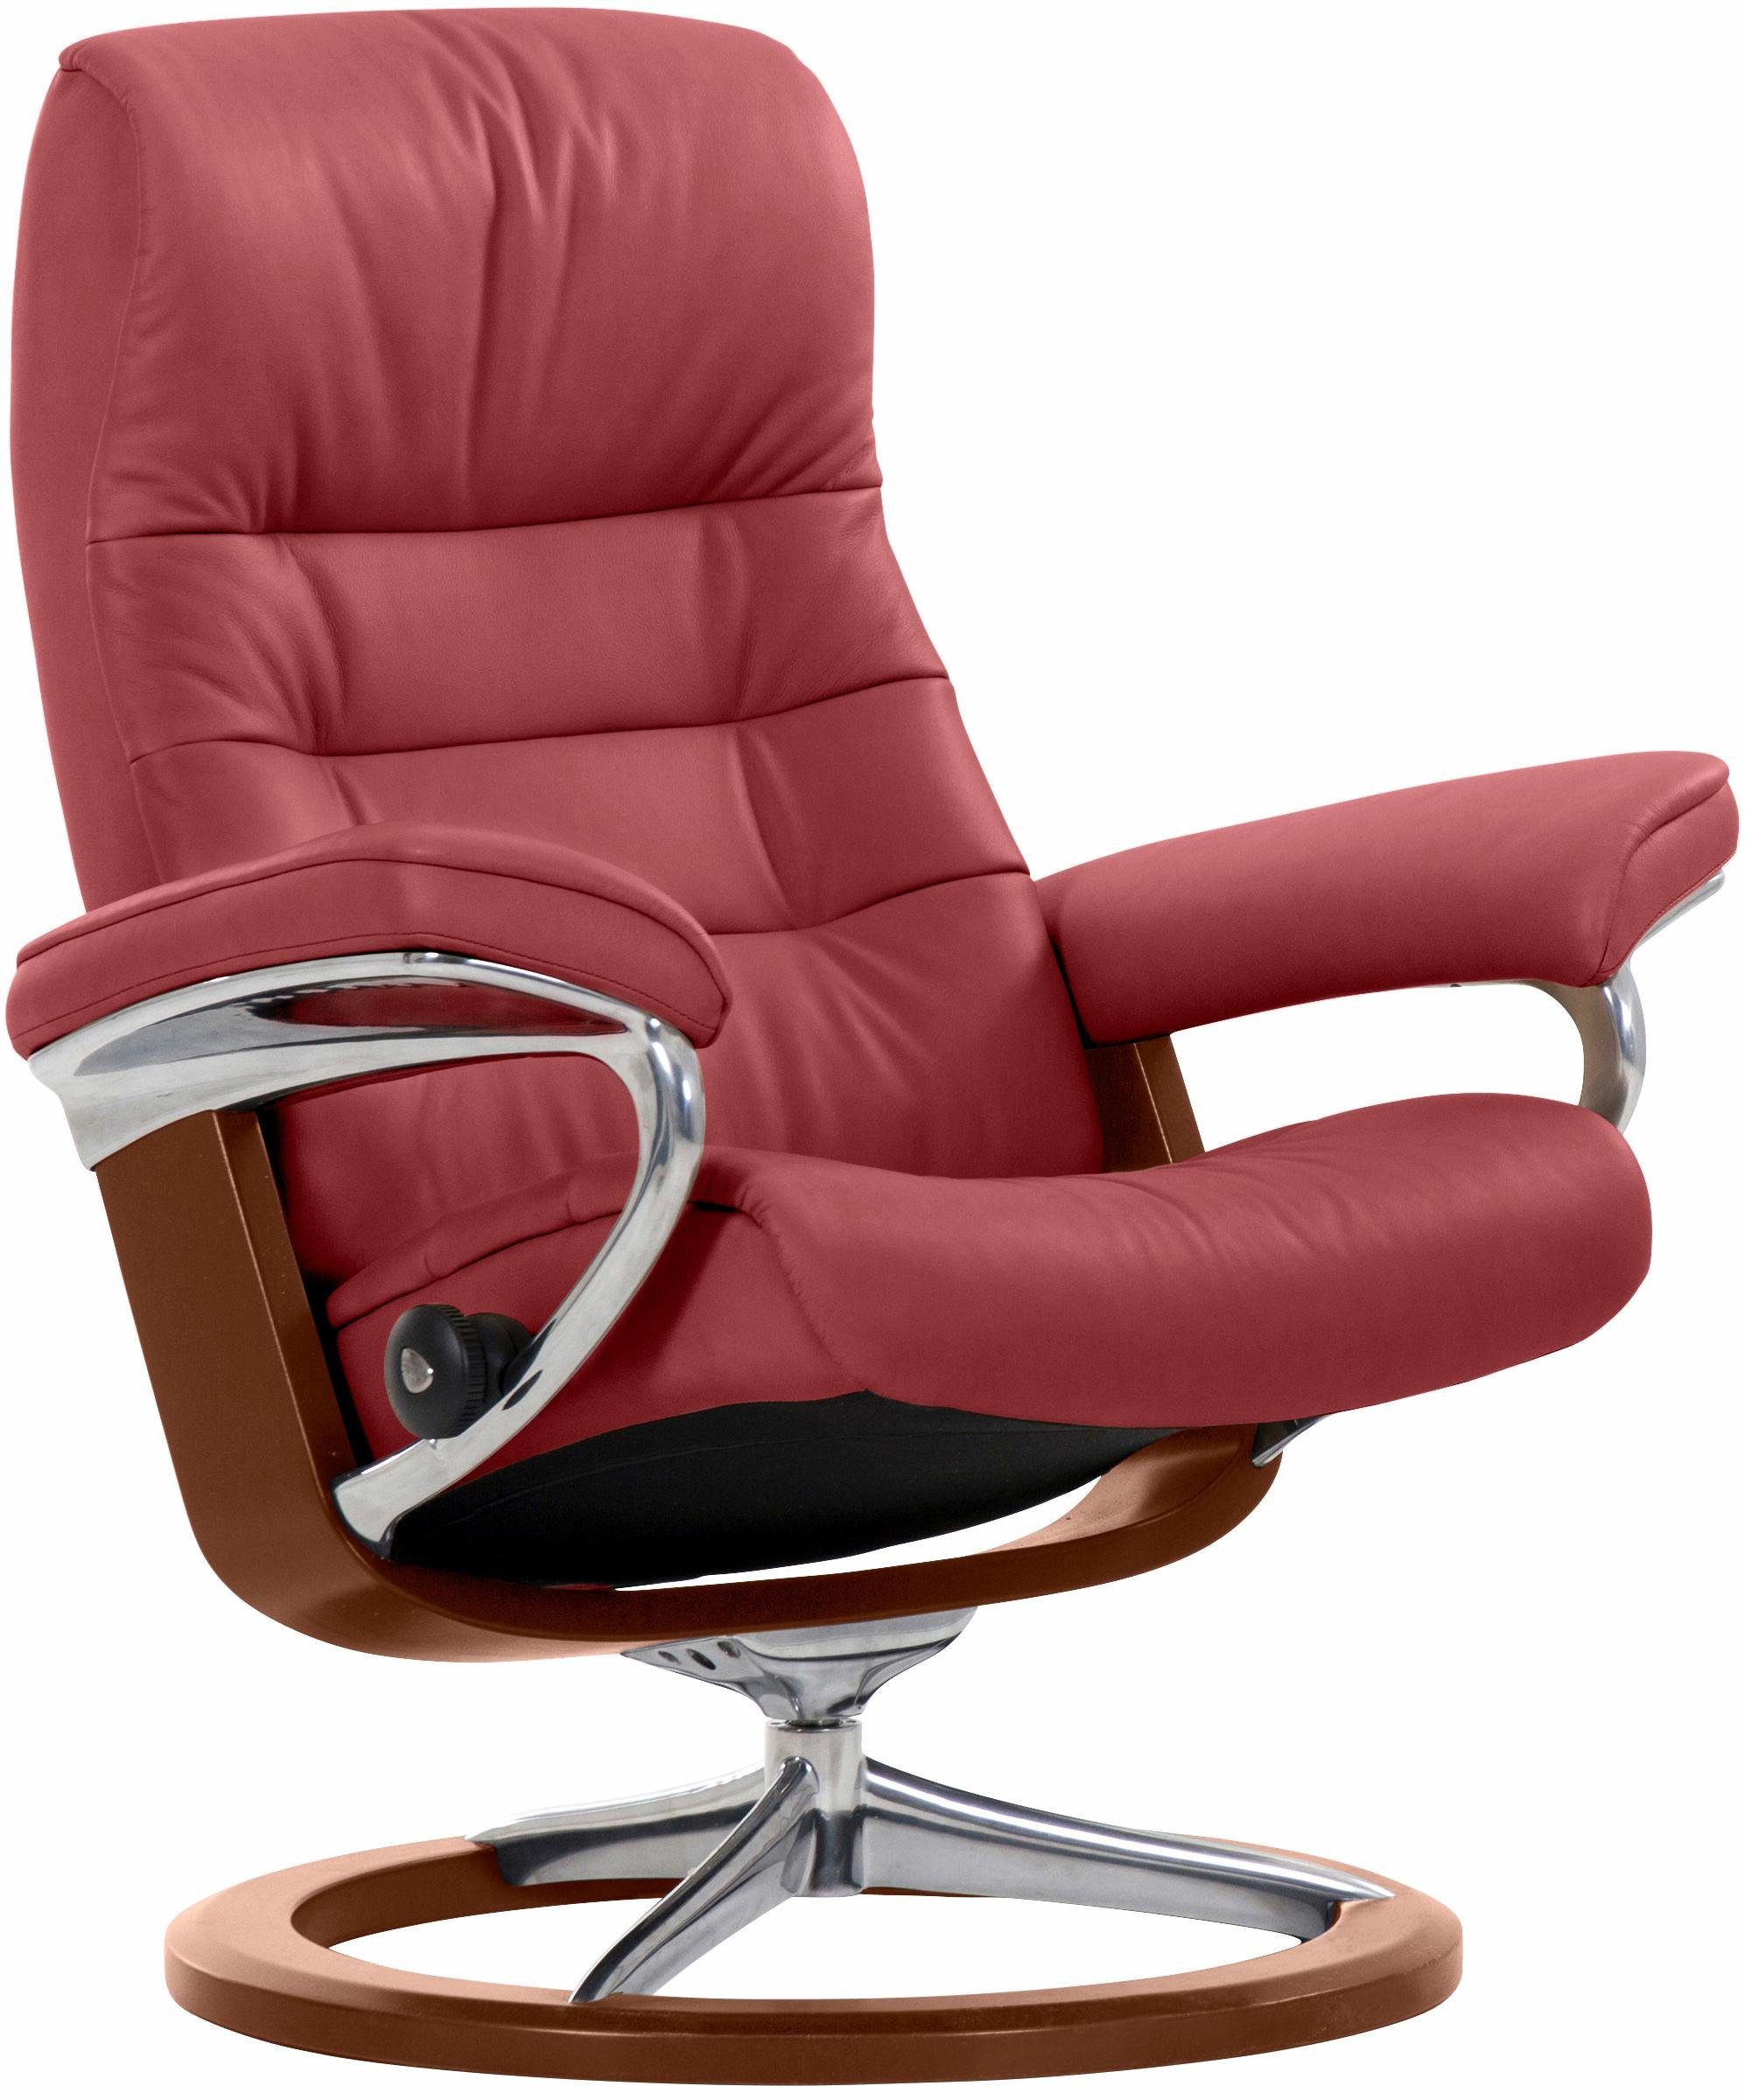 Stressless® Relaxsessel M, Base, Schlaffunktion mit Relaxsessel (Set, Größe mit Hocker, Hocker), mit mit Opal Signature